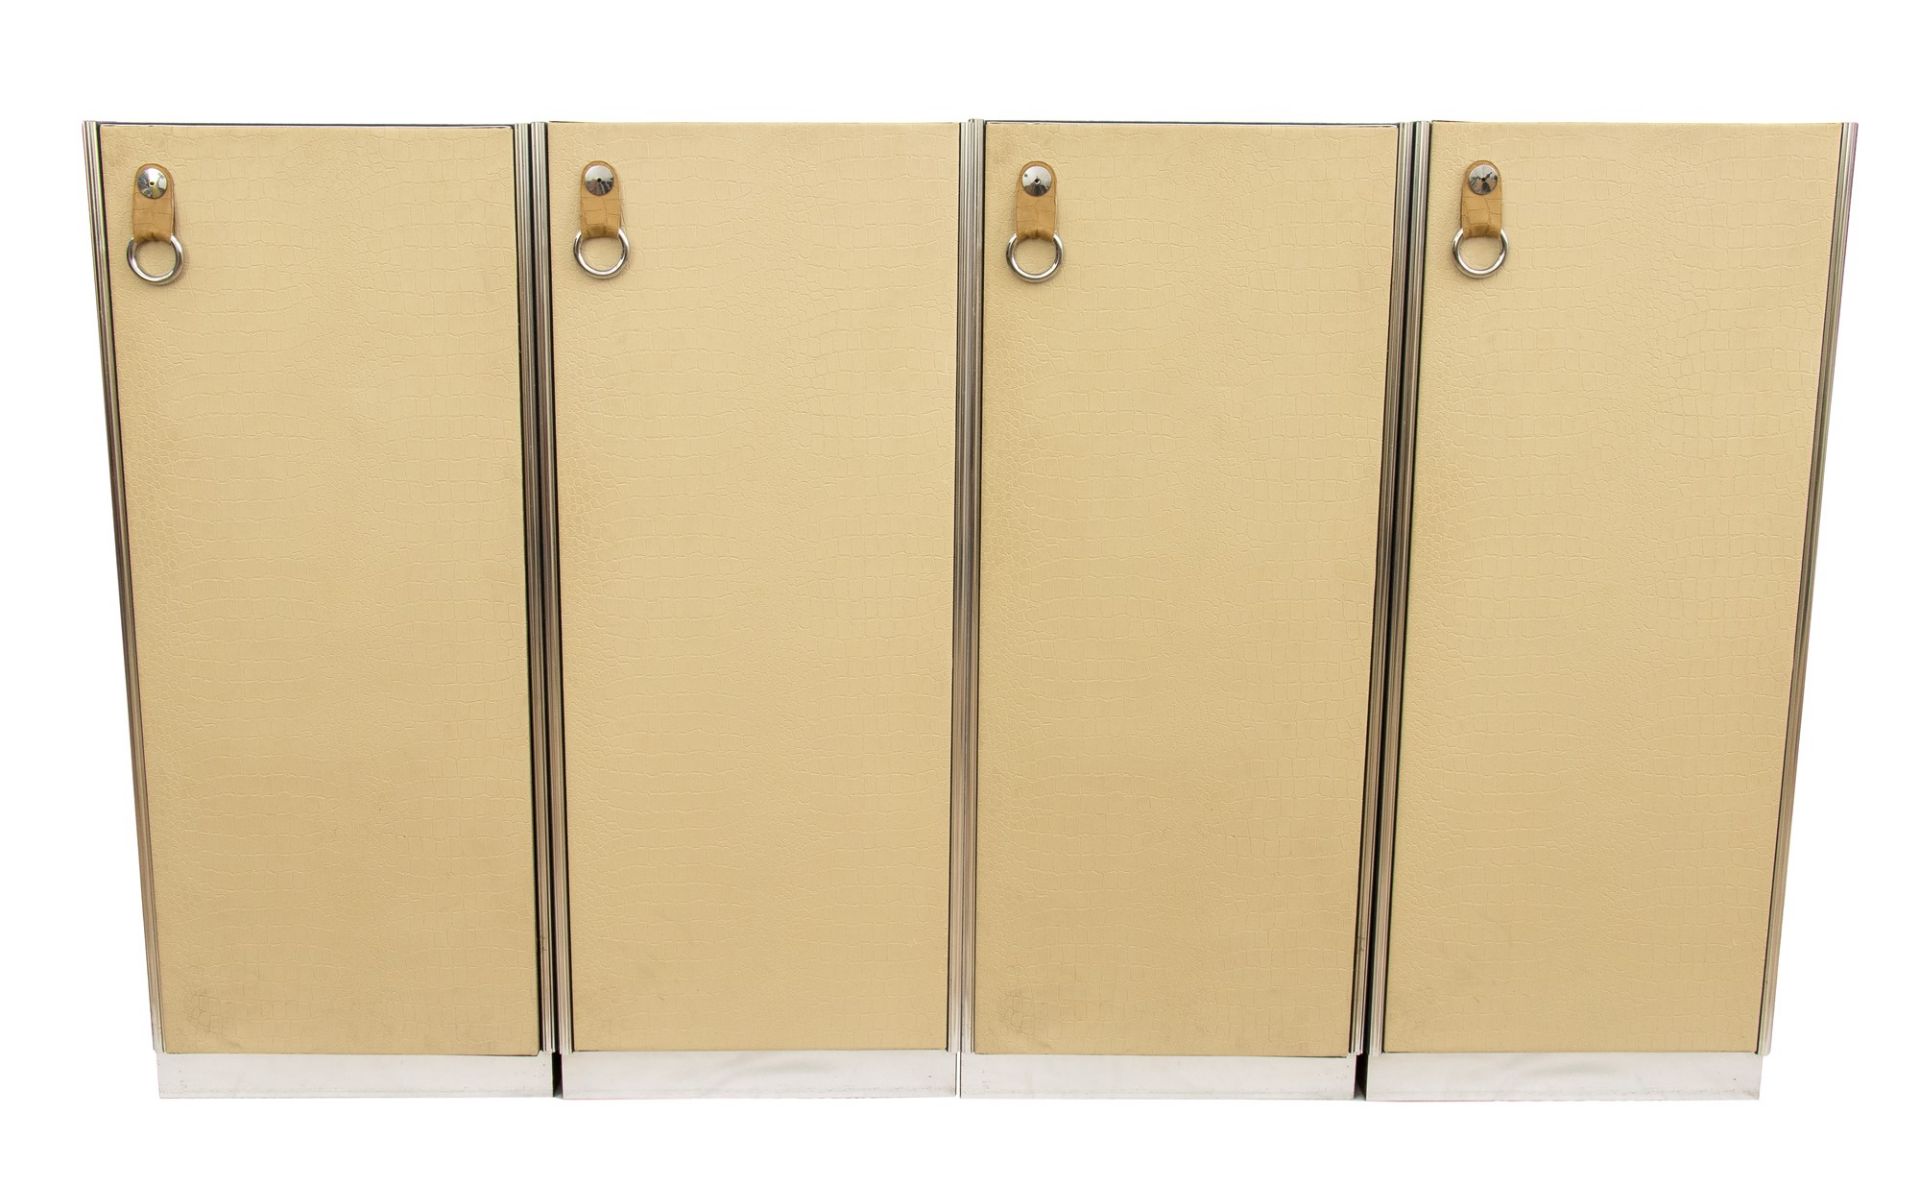 Guido Faleschini 4 modules wooden wardrobe covered in blue suede and white leather. Steel handles